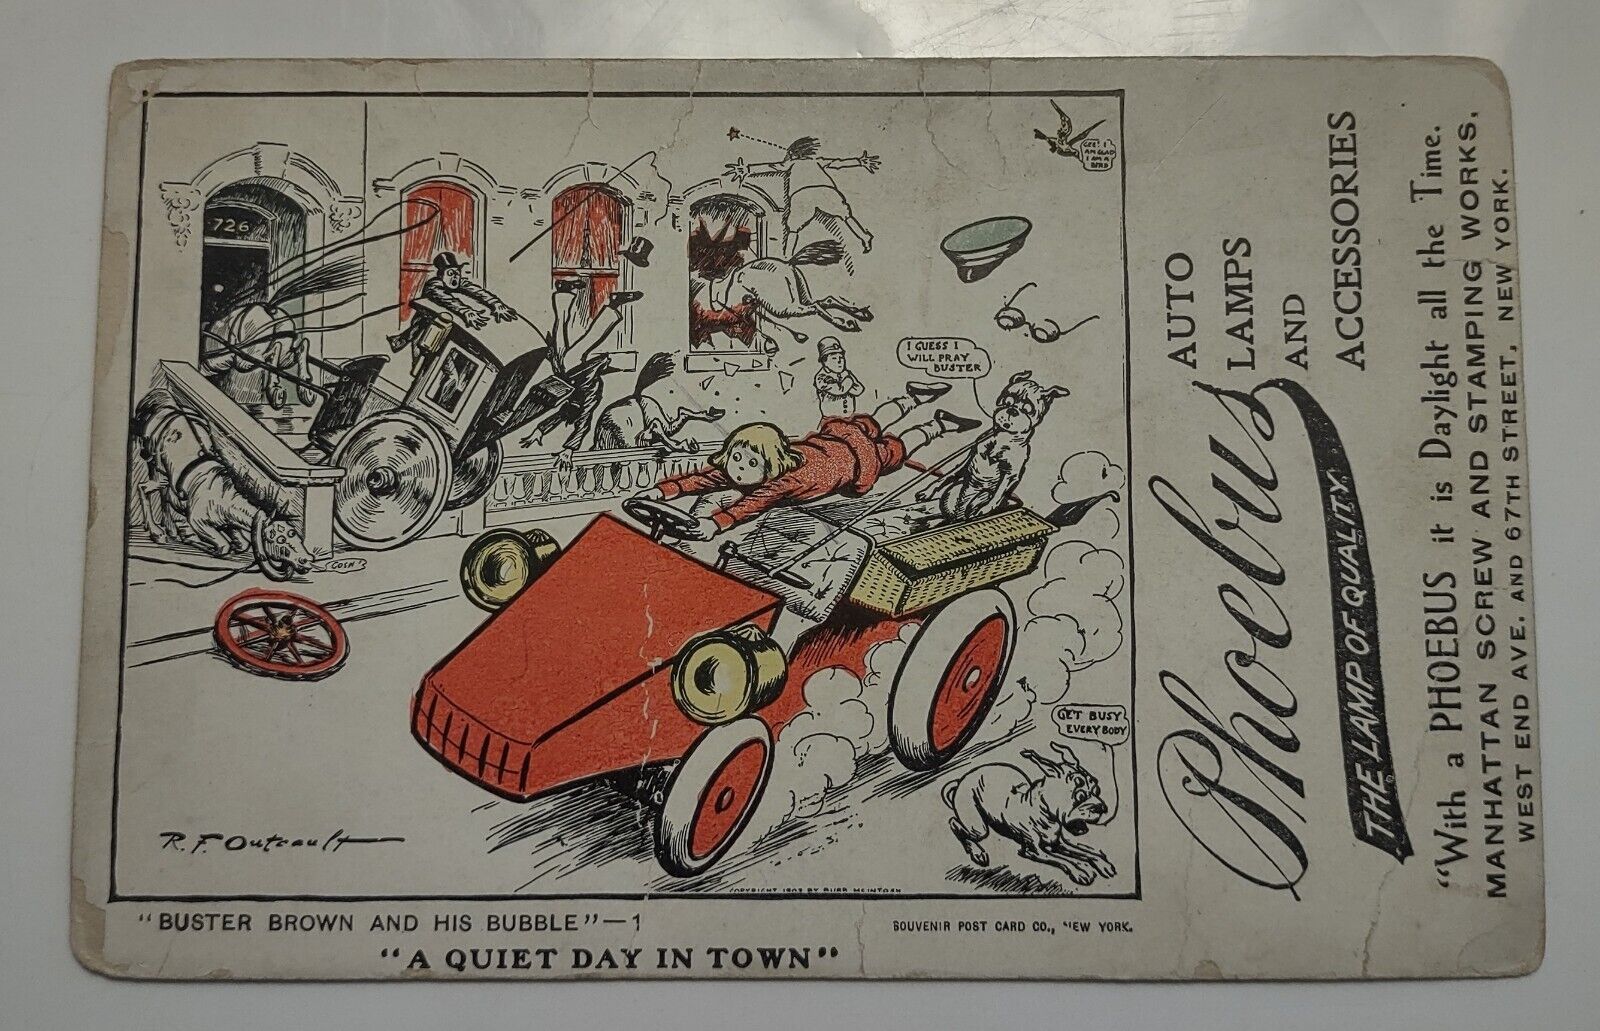 Buster Brown R.F. Outcault Advertising Postcard Phoebus Auto Lamps Accessories 